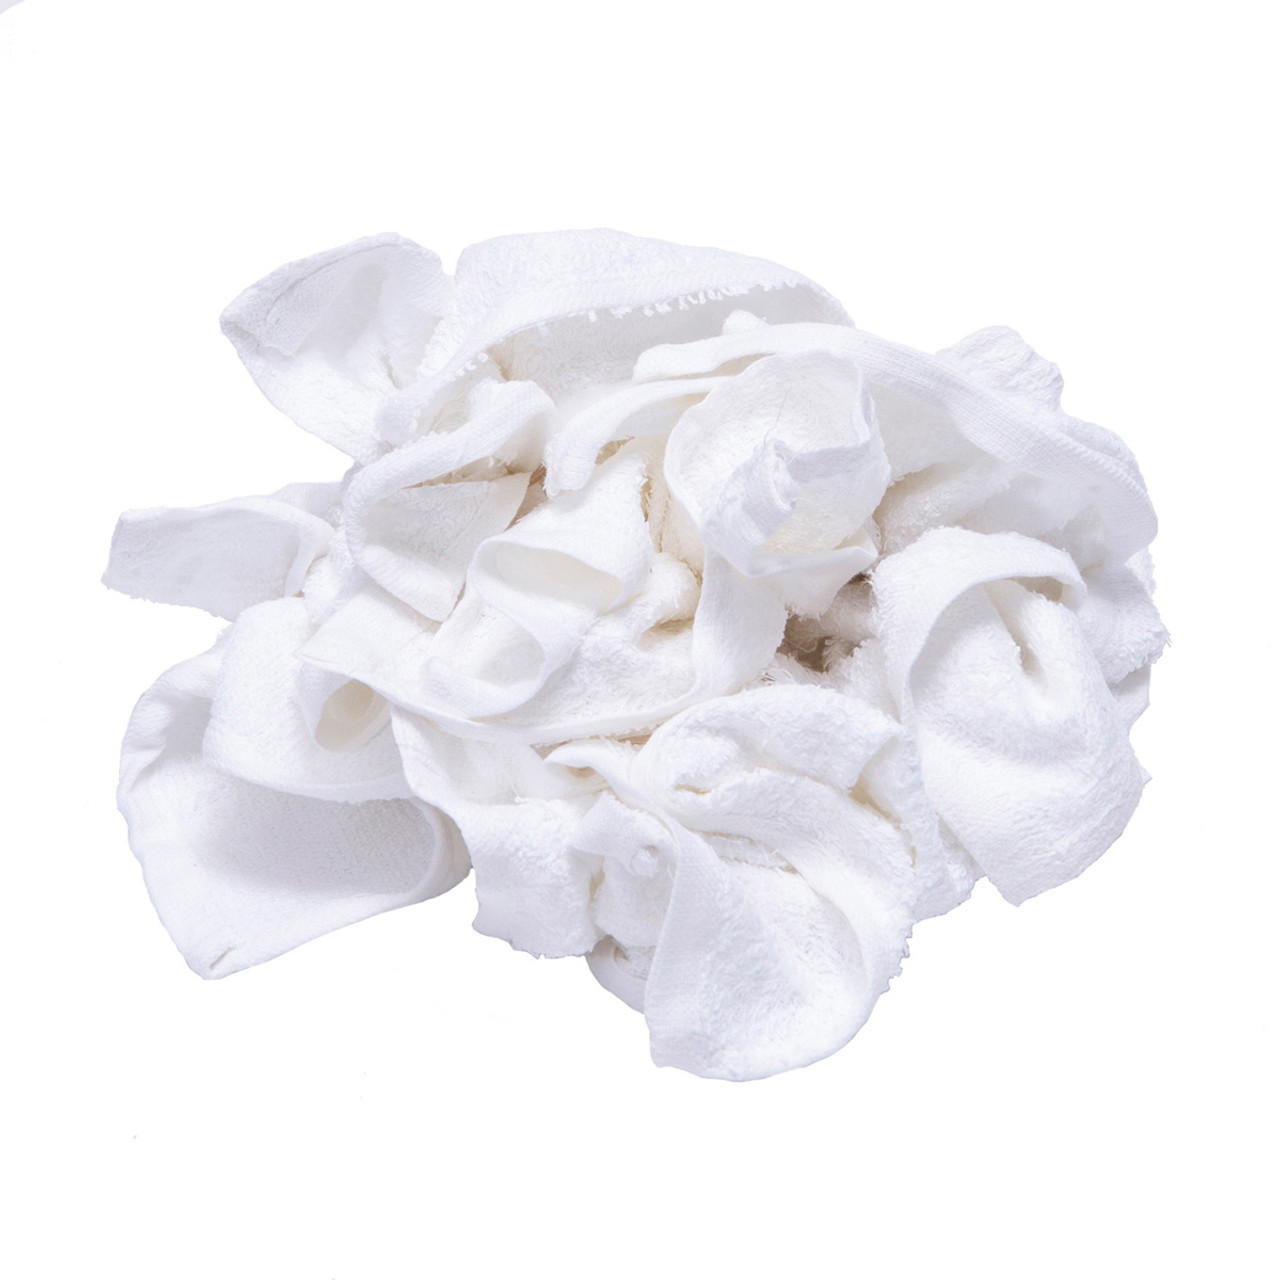 https://cdn11.bigcommerce.com/s-a5uwe4c7wz/images/stencil/1280x1280/products/600/1548/Wash-Cloth-Rags-Terry-Bulk-New-White__56226.1585750952.jpg?c=1